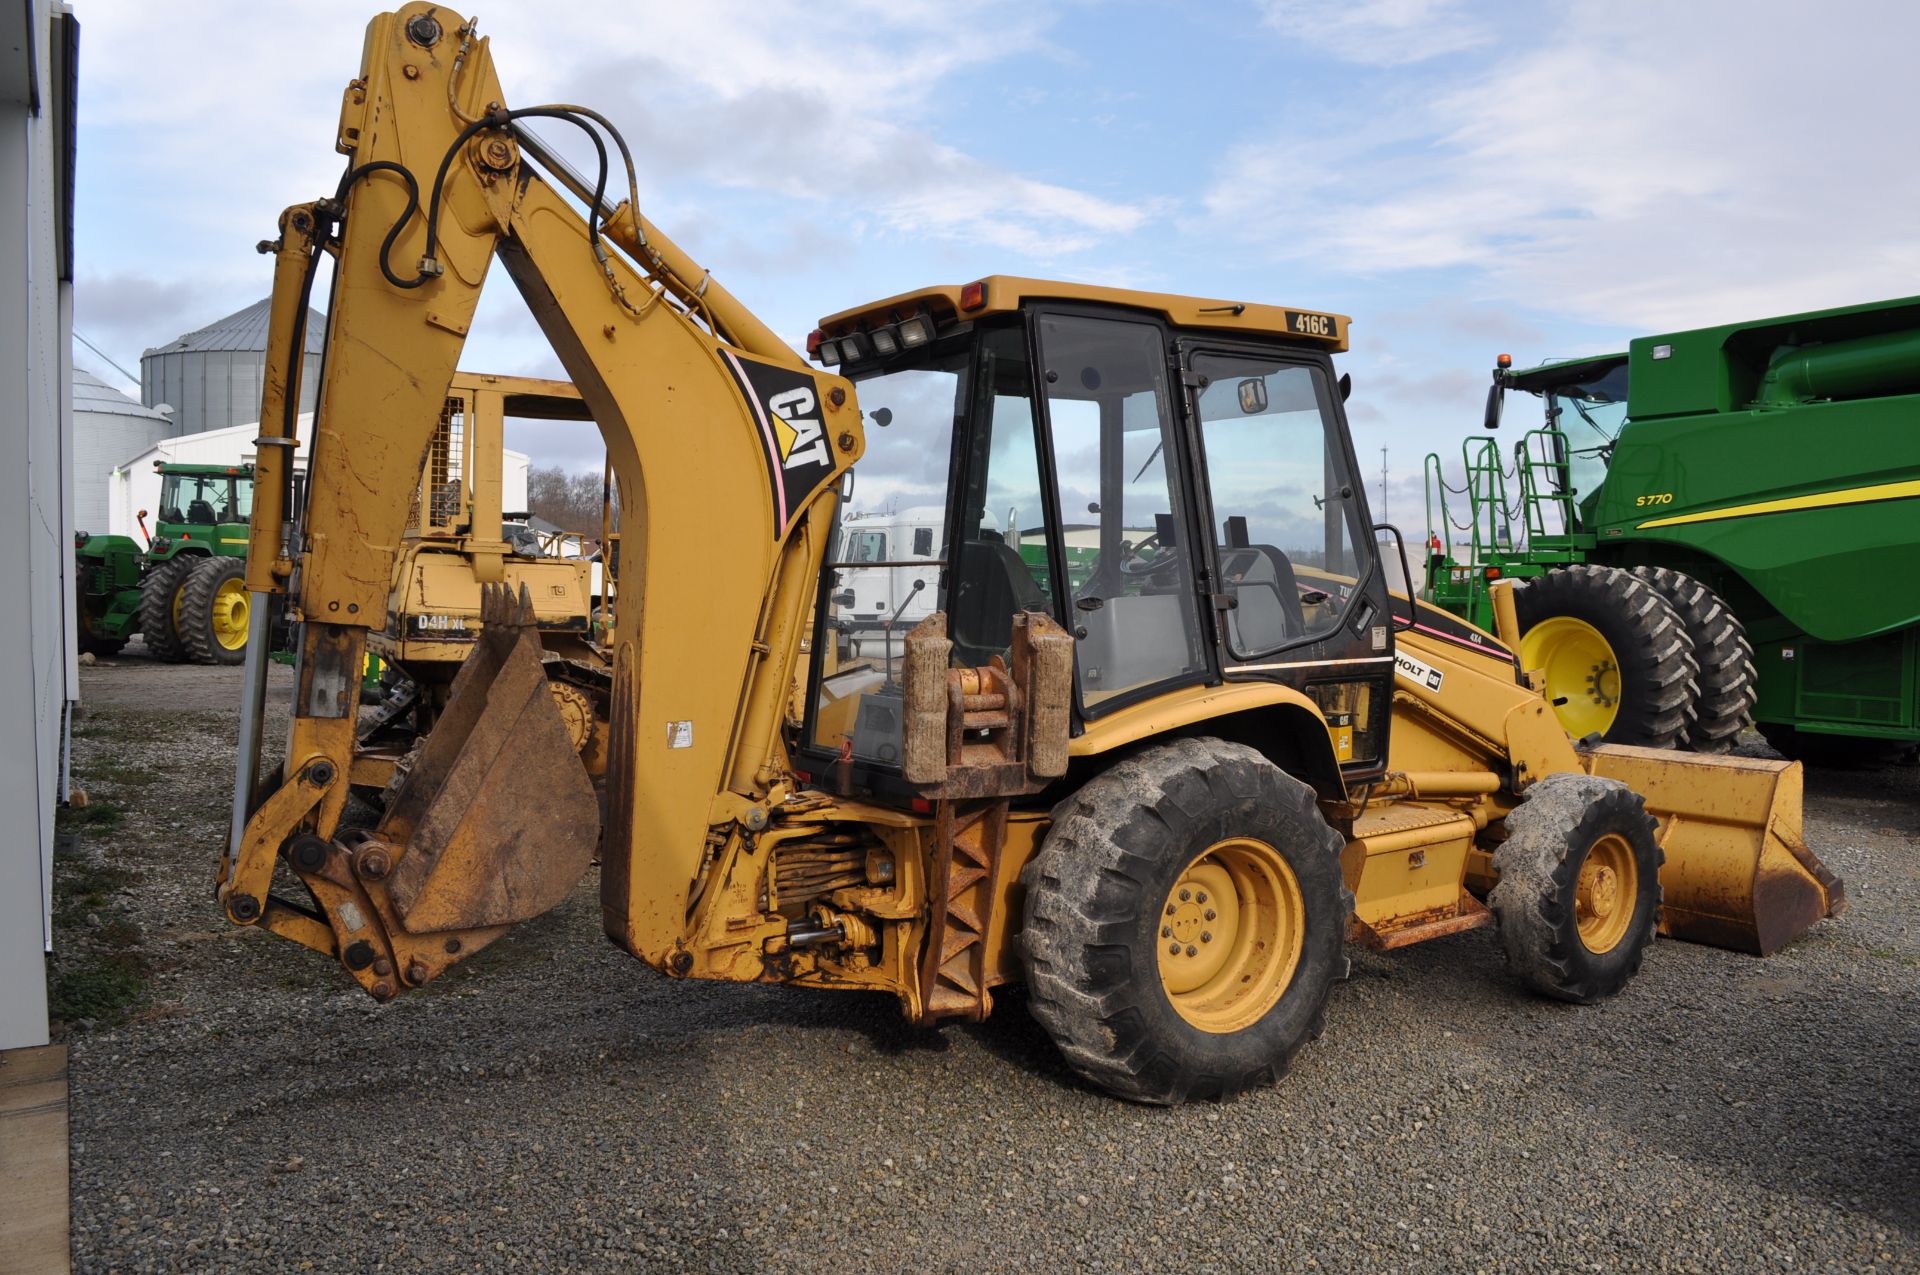 CAT 416C backhoe, 88” bucket, 19.5-24 rear, 12.5/80-18 front, 4x4, 18” and 24” digging buckets - Image 3 of 35